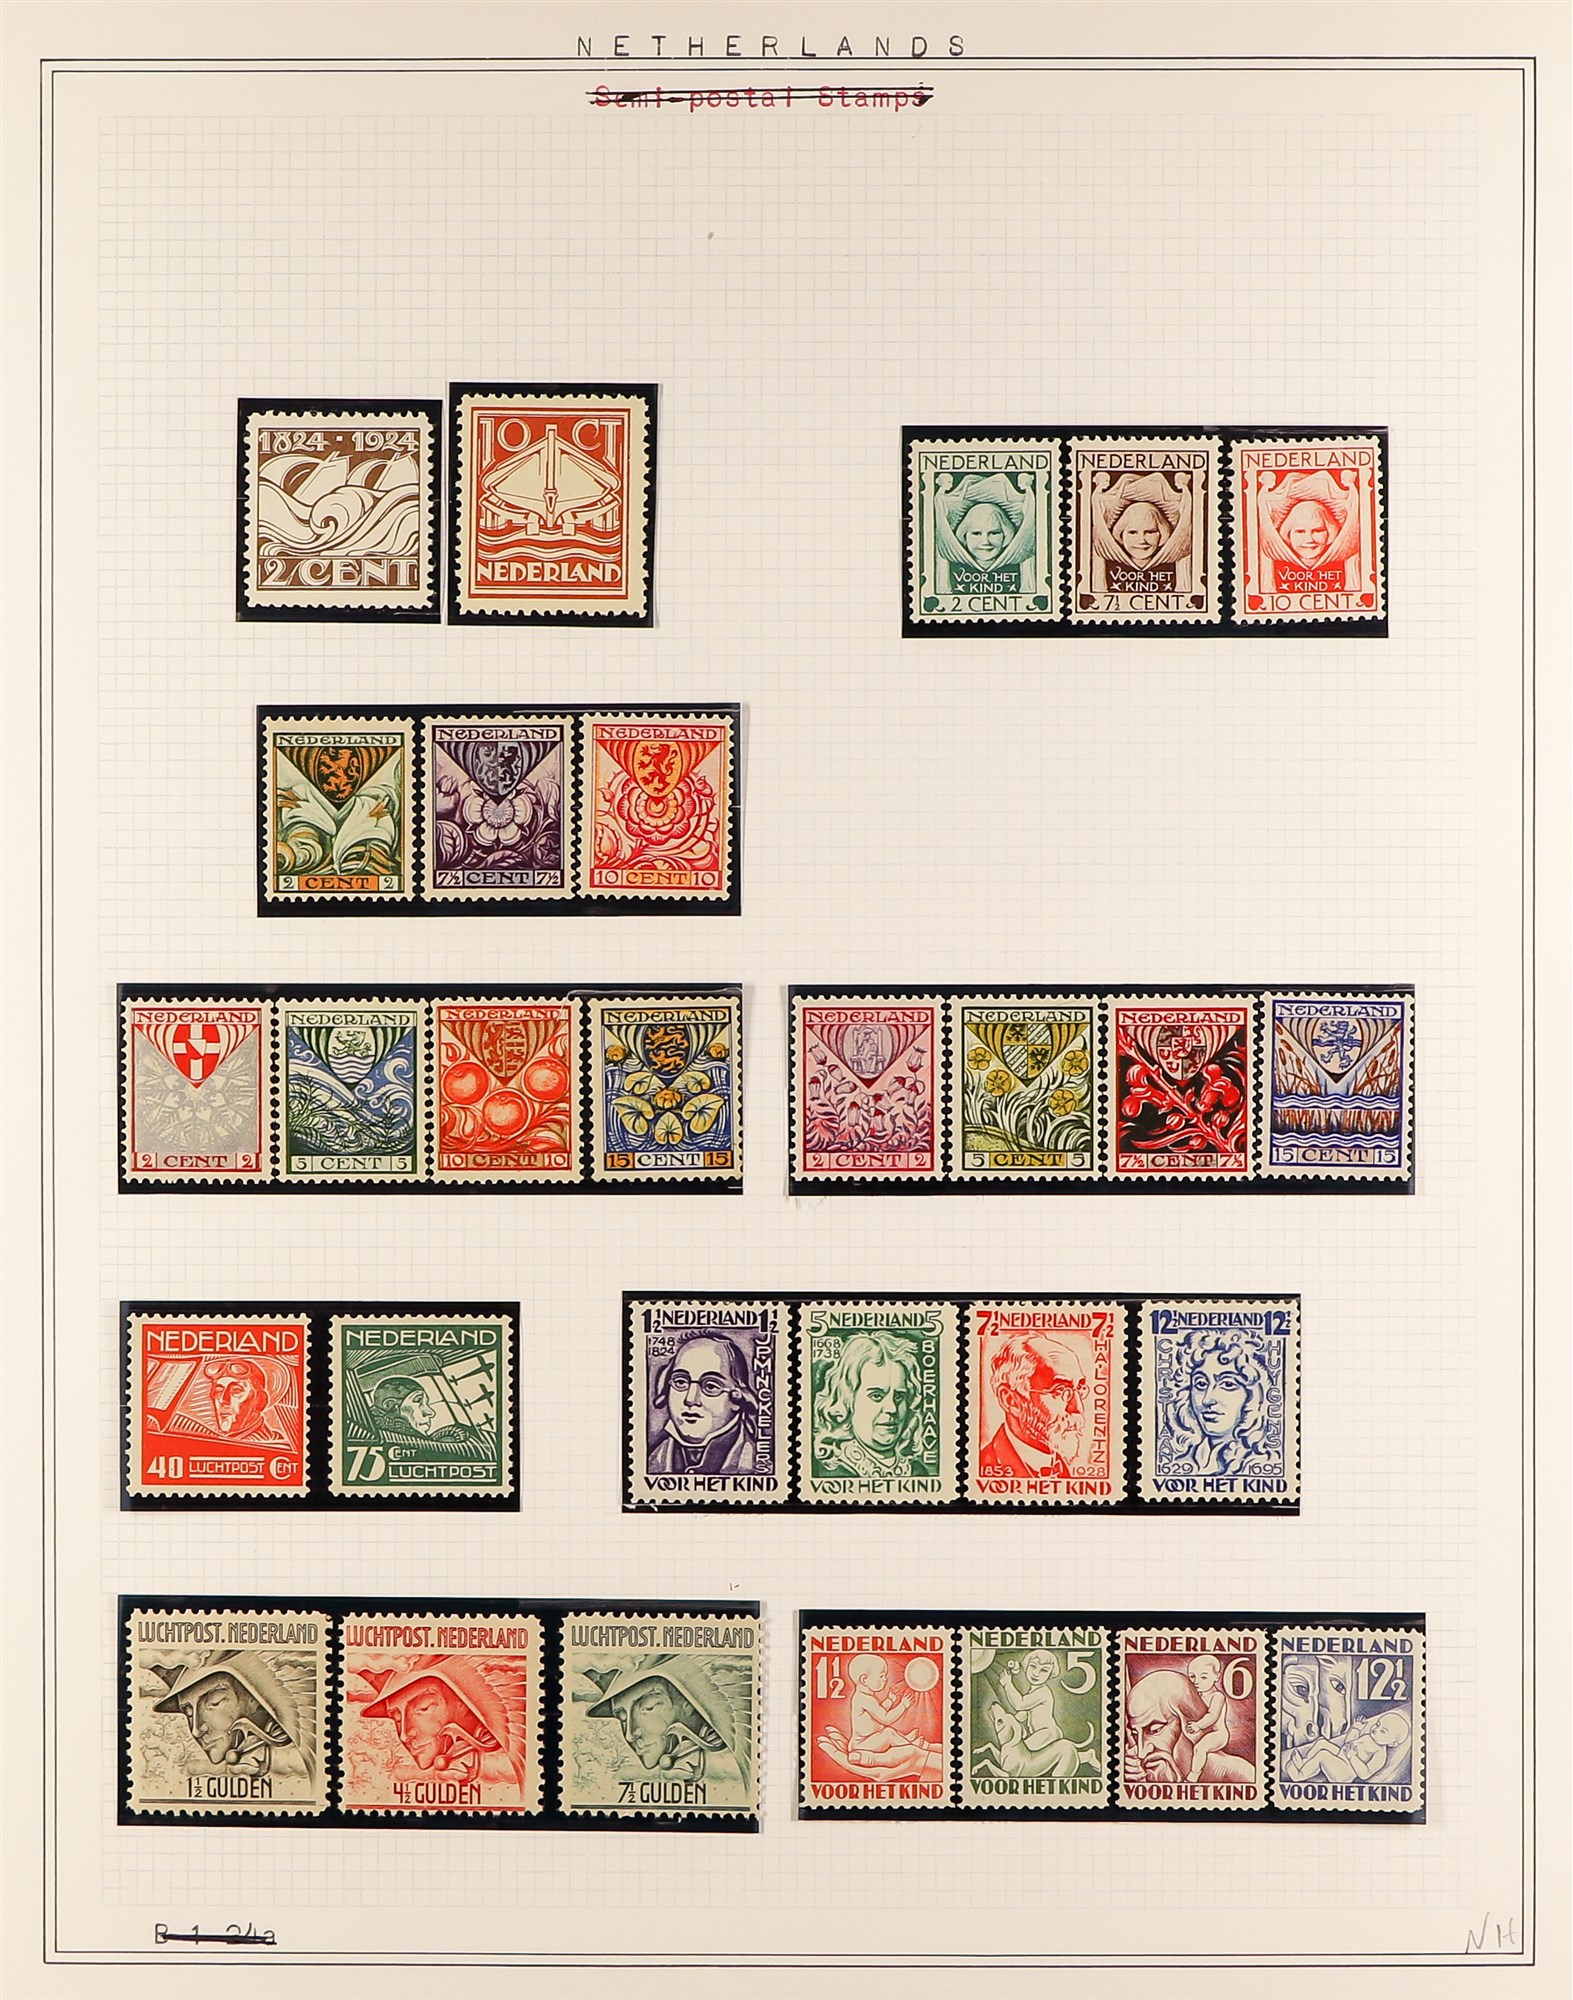 NETHERLANDS 1924 - 1967 NEVER HINGED MINT COLLECTION around 280 stamps on album pages, complete sets